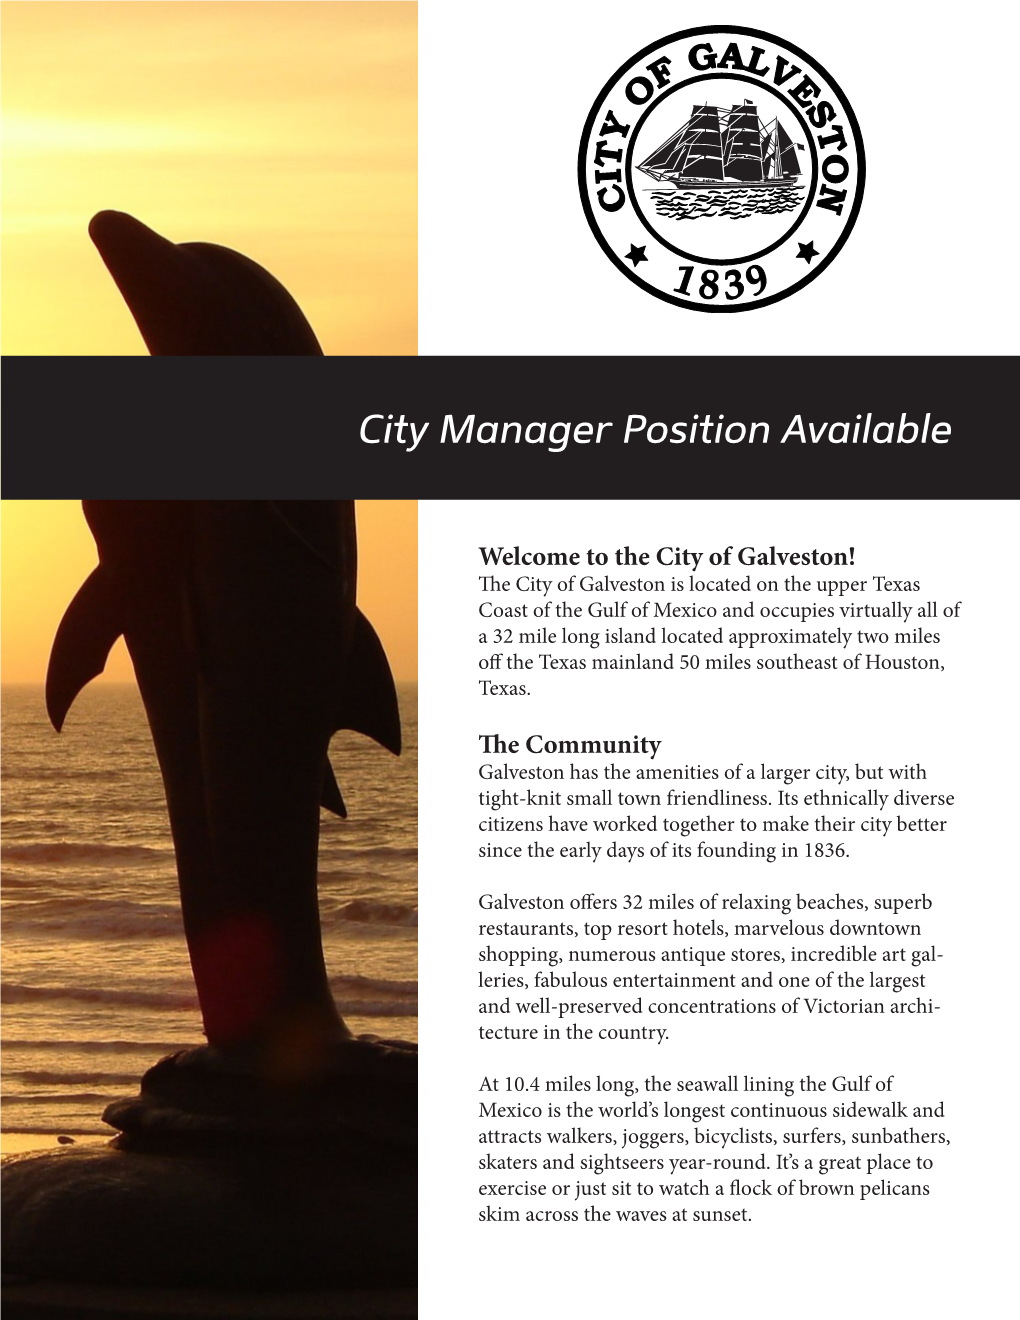 City Manager Position Available